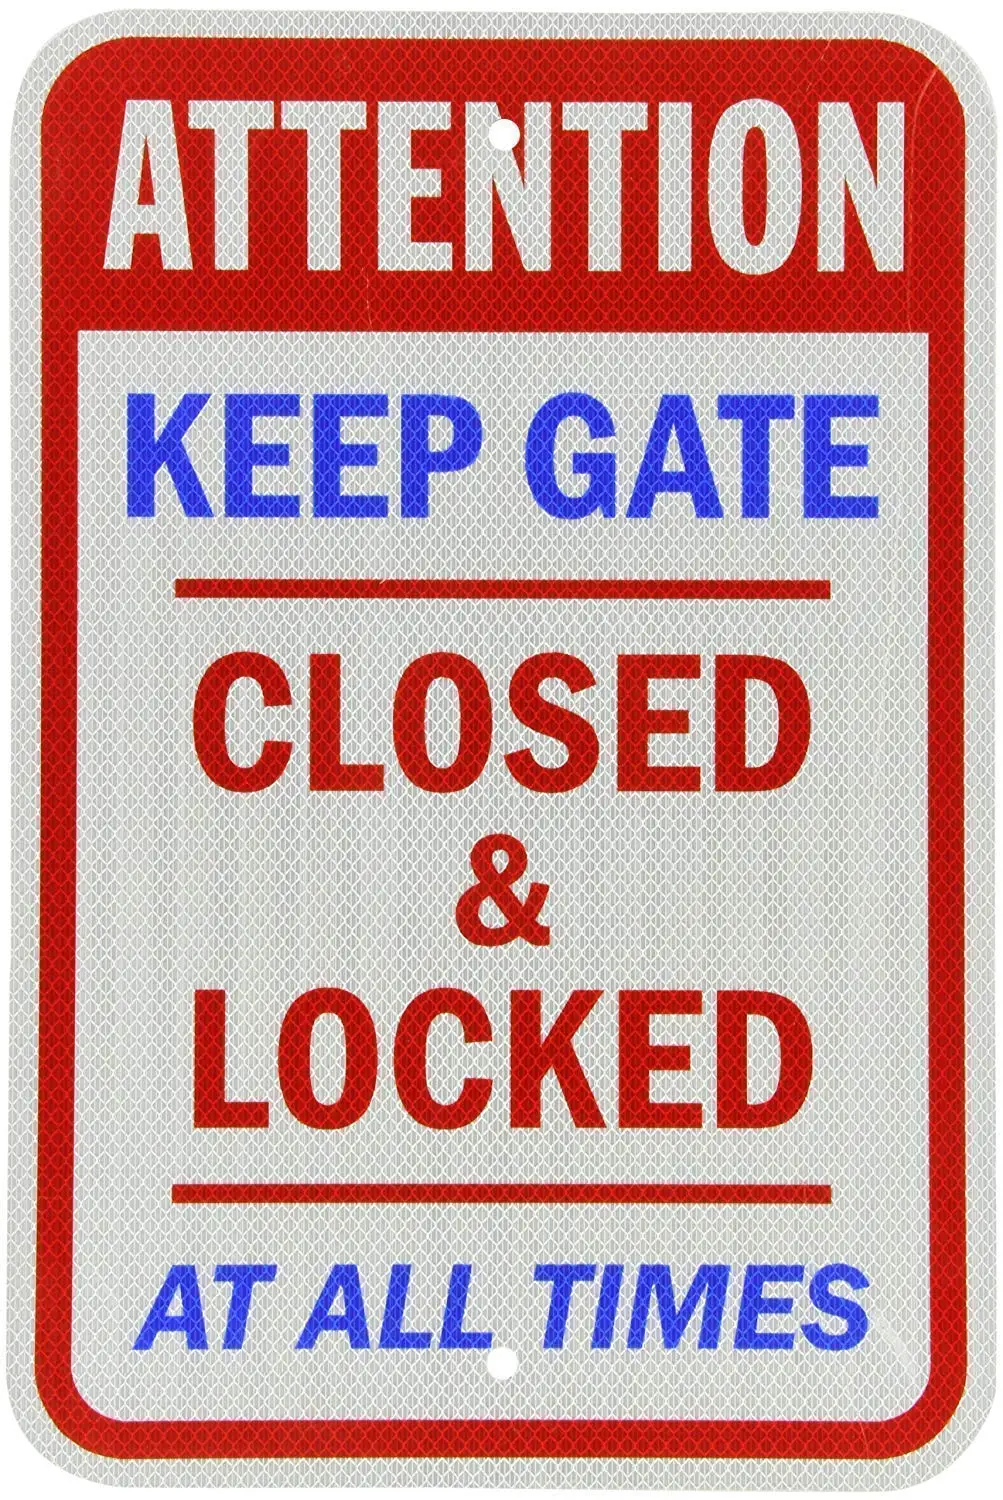 

Attention Tin Sign Keep Gate Closed Locked at All Times Blue Red on White Garage Home Yard Metal Aluminum Sign for Wall Art